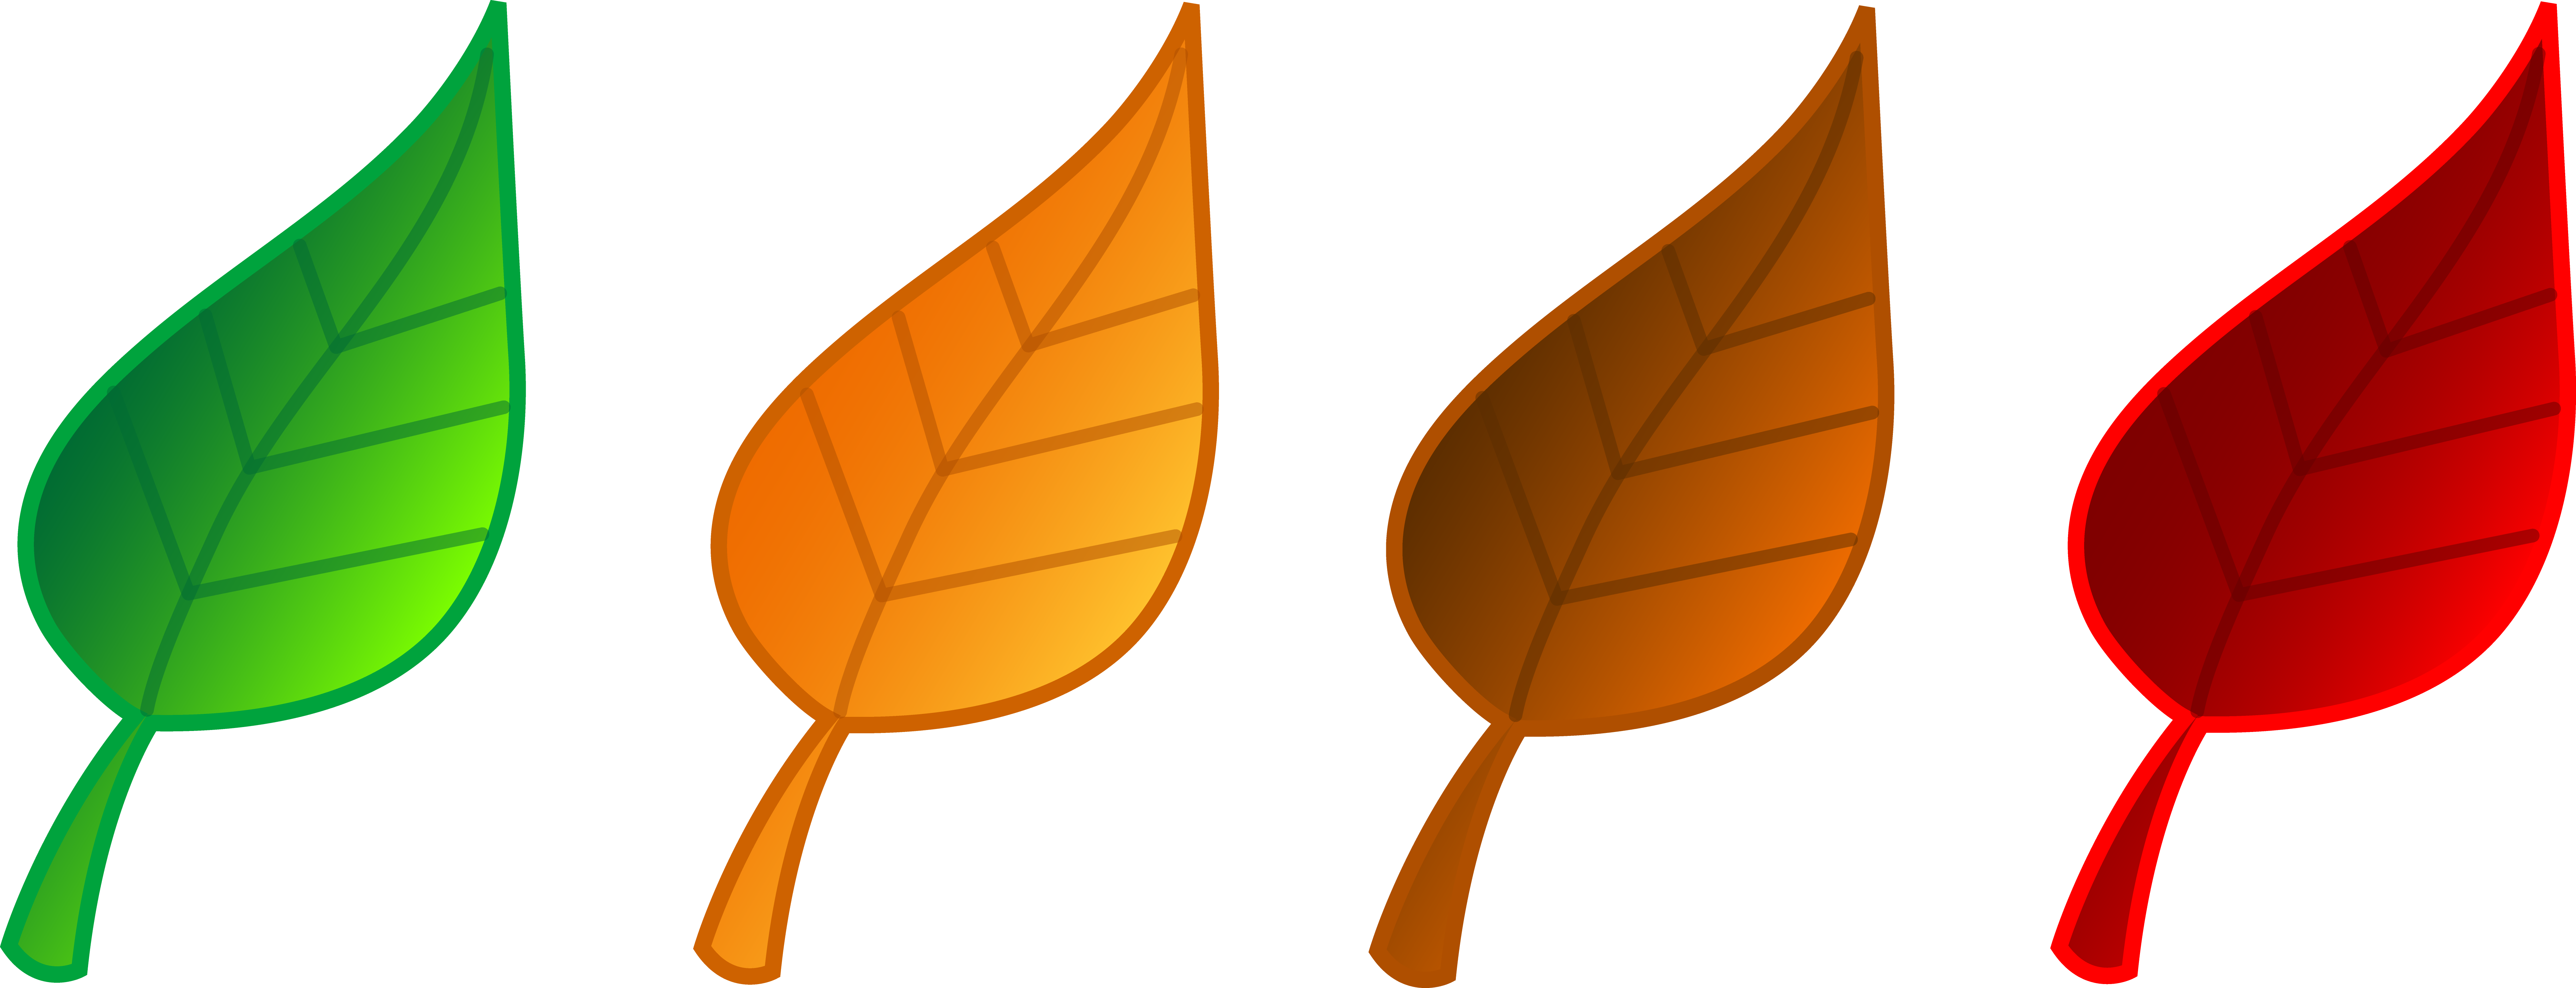 Fall leaves clip art free vector for free download about free 2